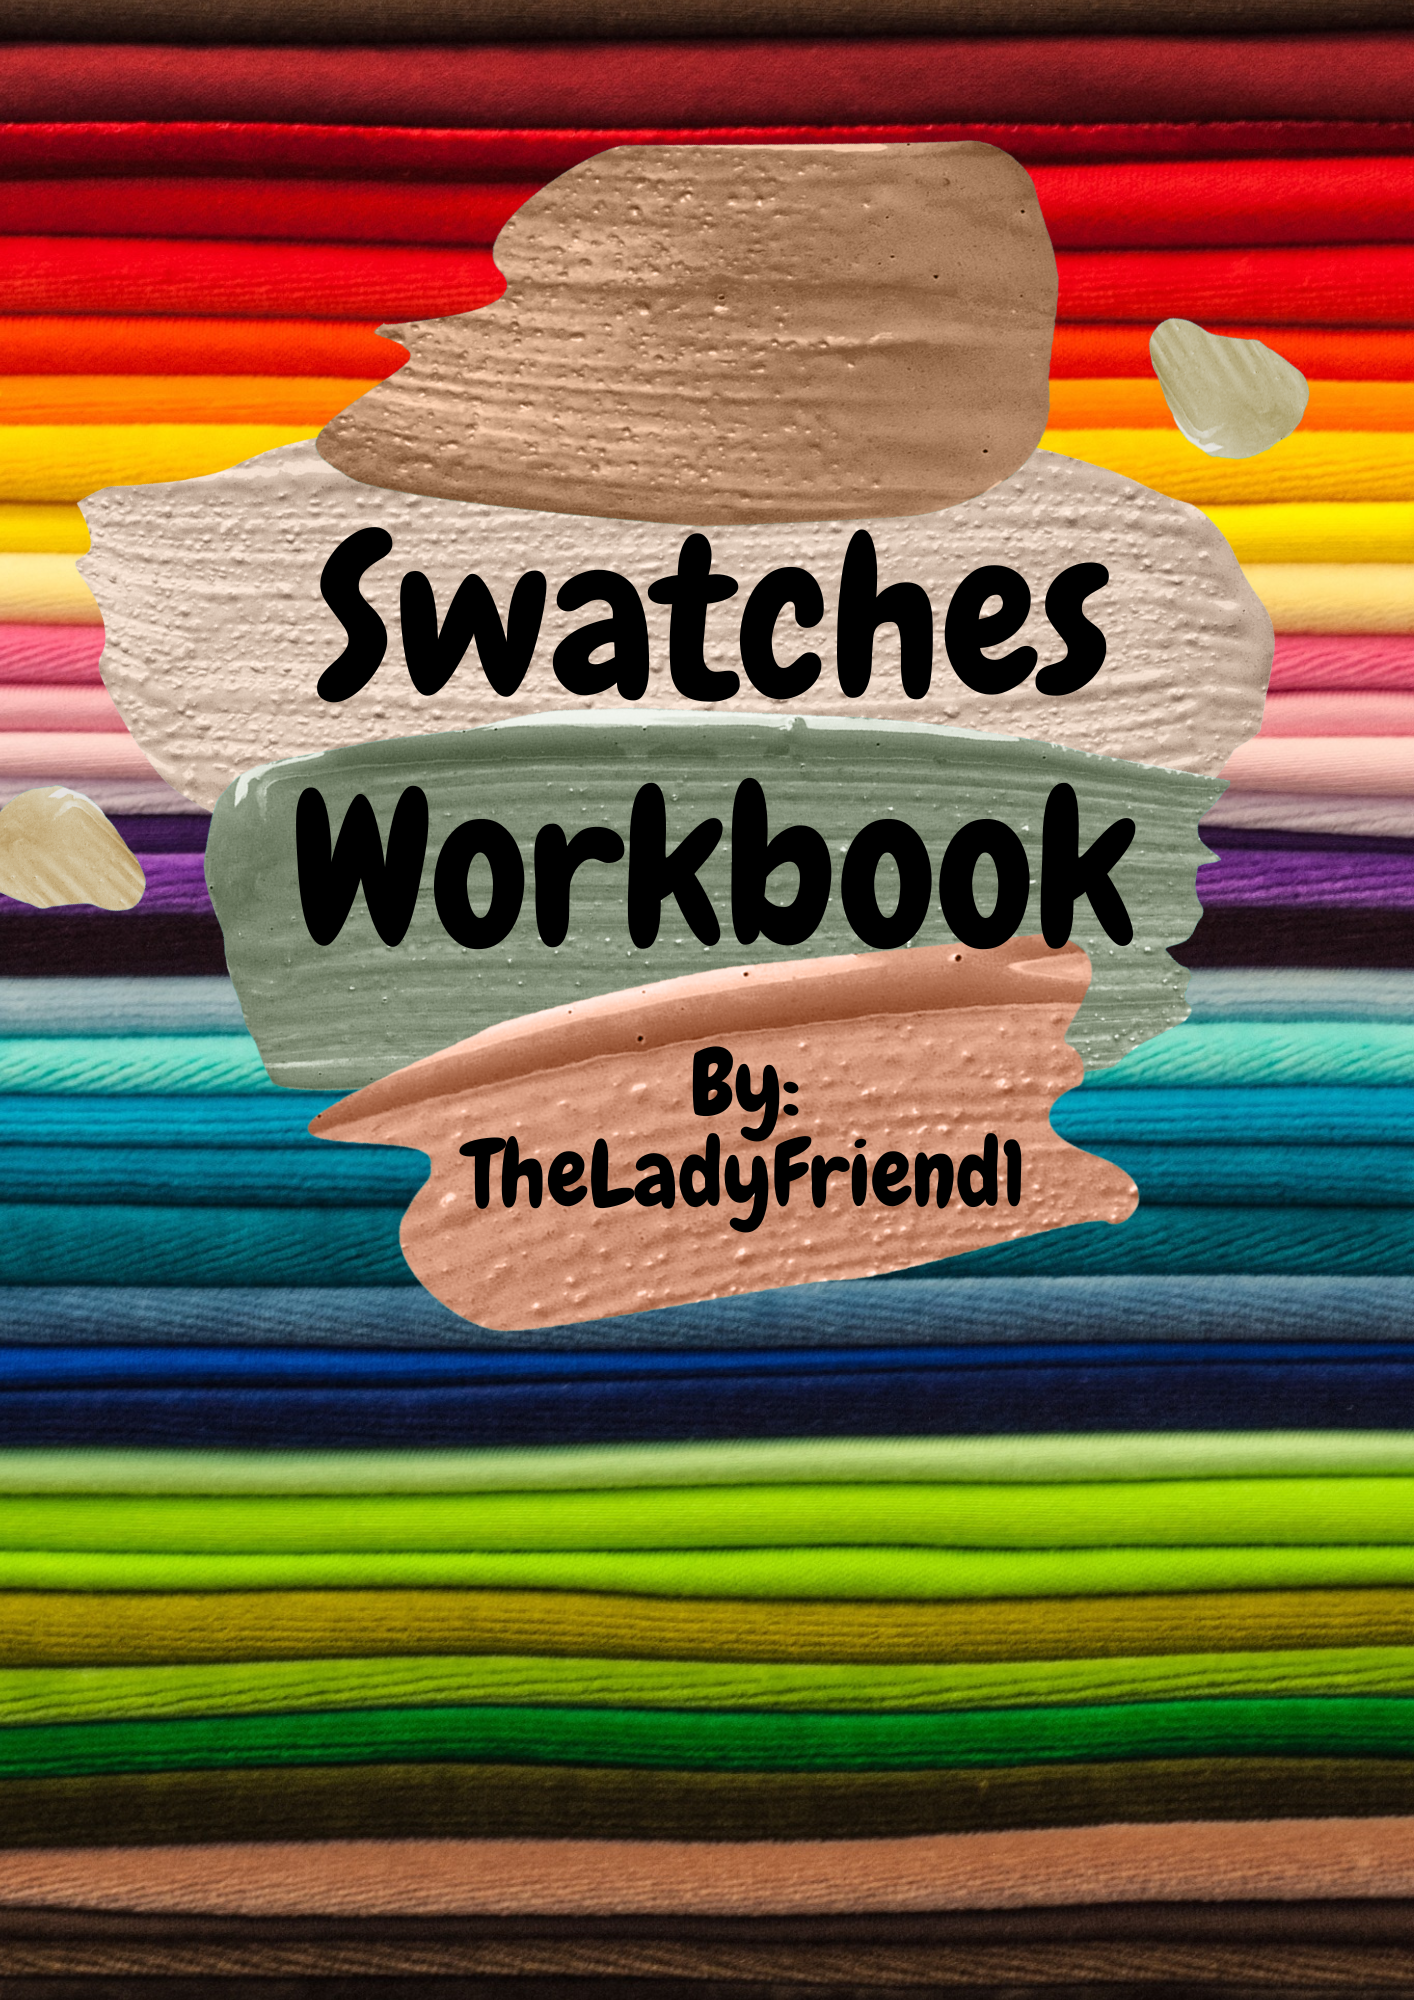 swatches workbook cover - my books